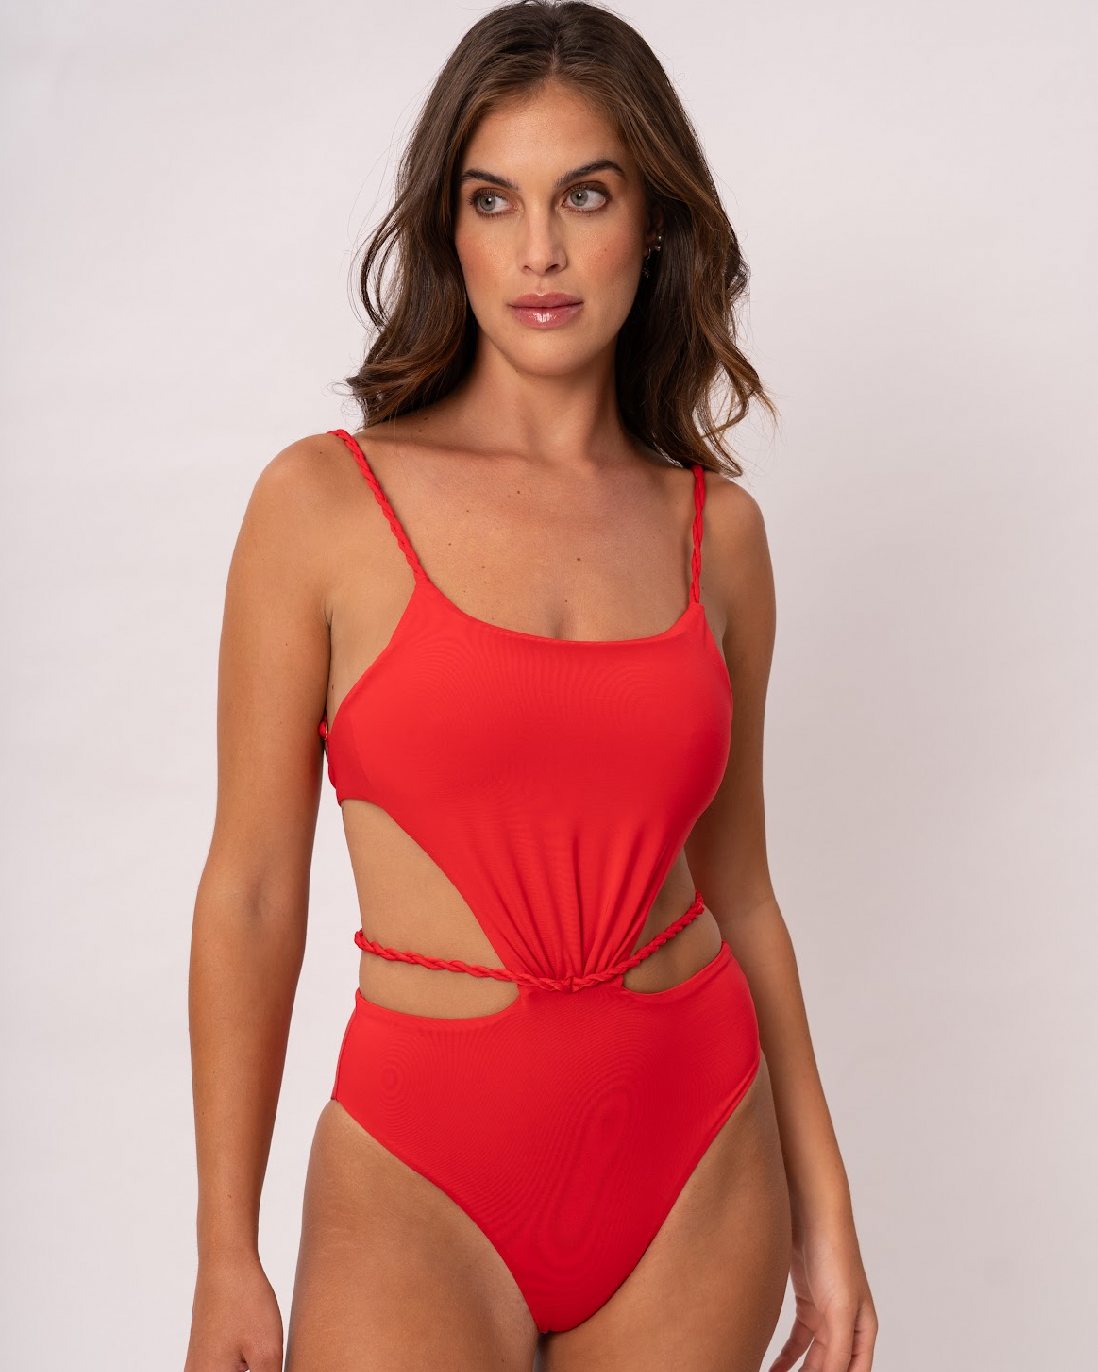 Mompossina - Red Passion One Piece